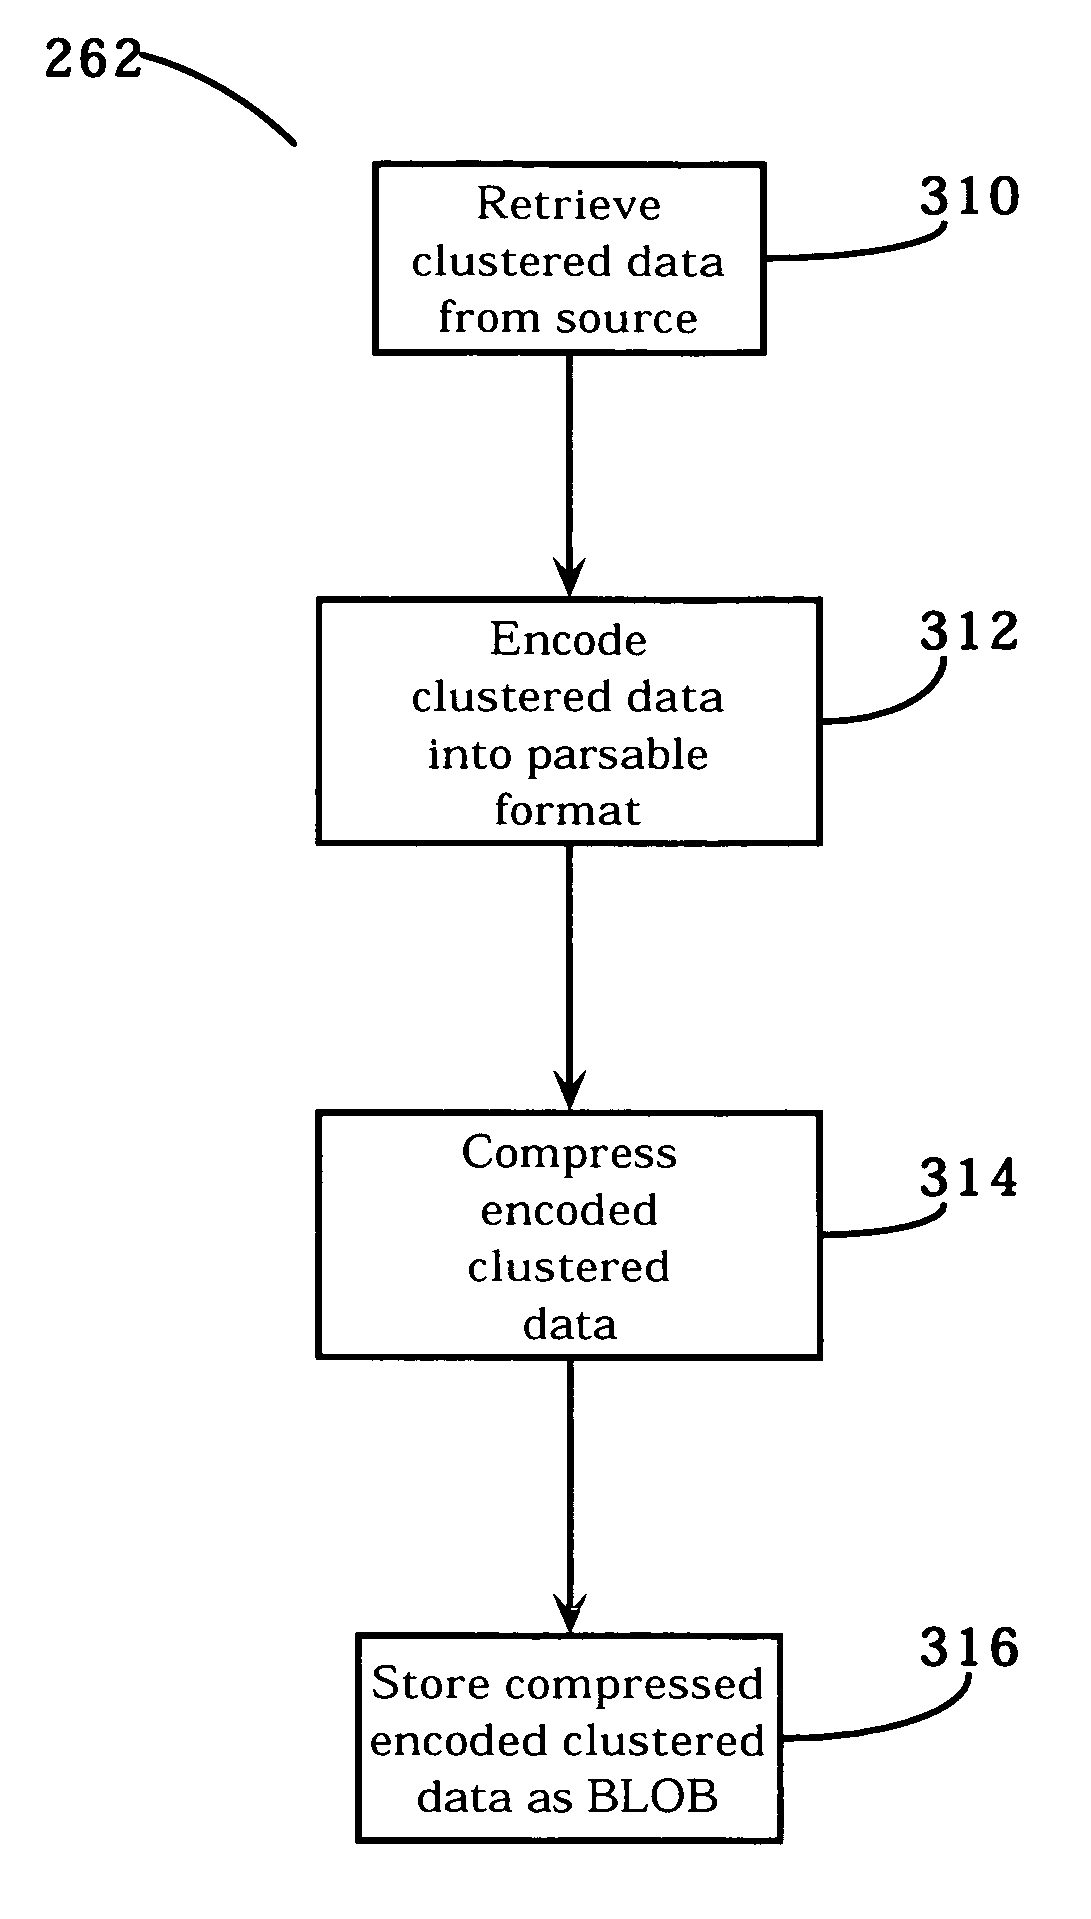 Optimal data storage and access for clustered data in a relational database